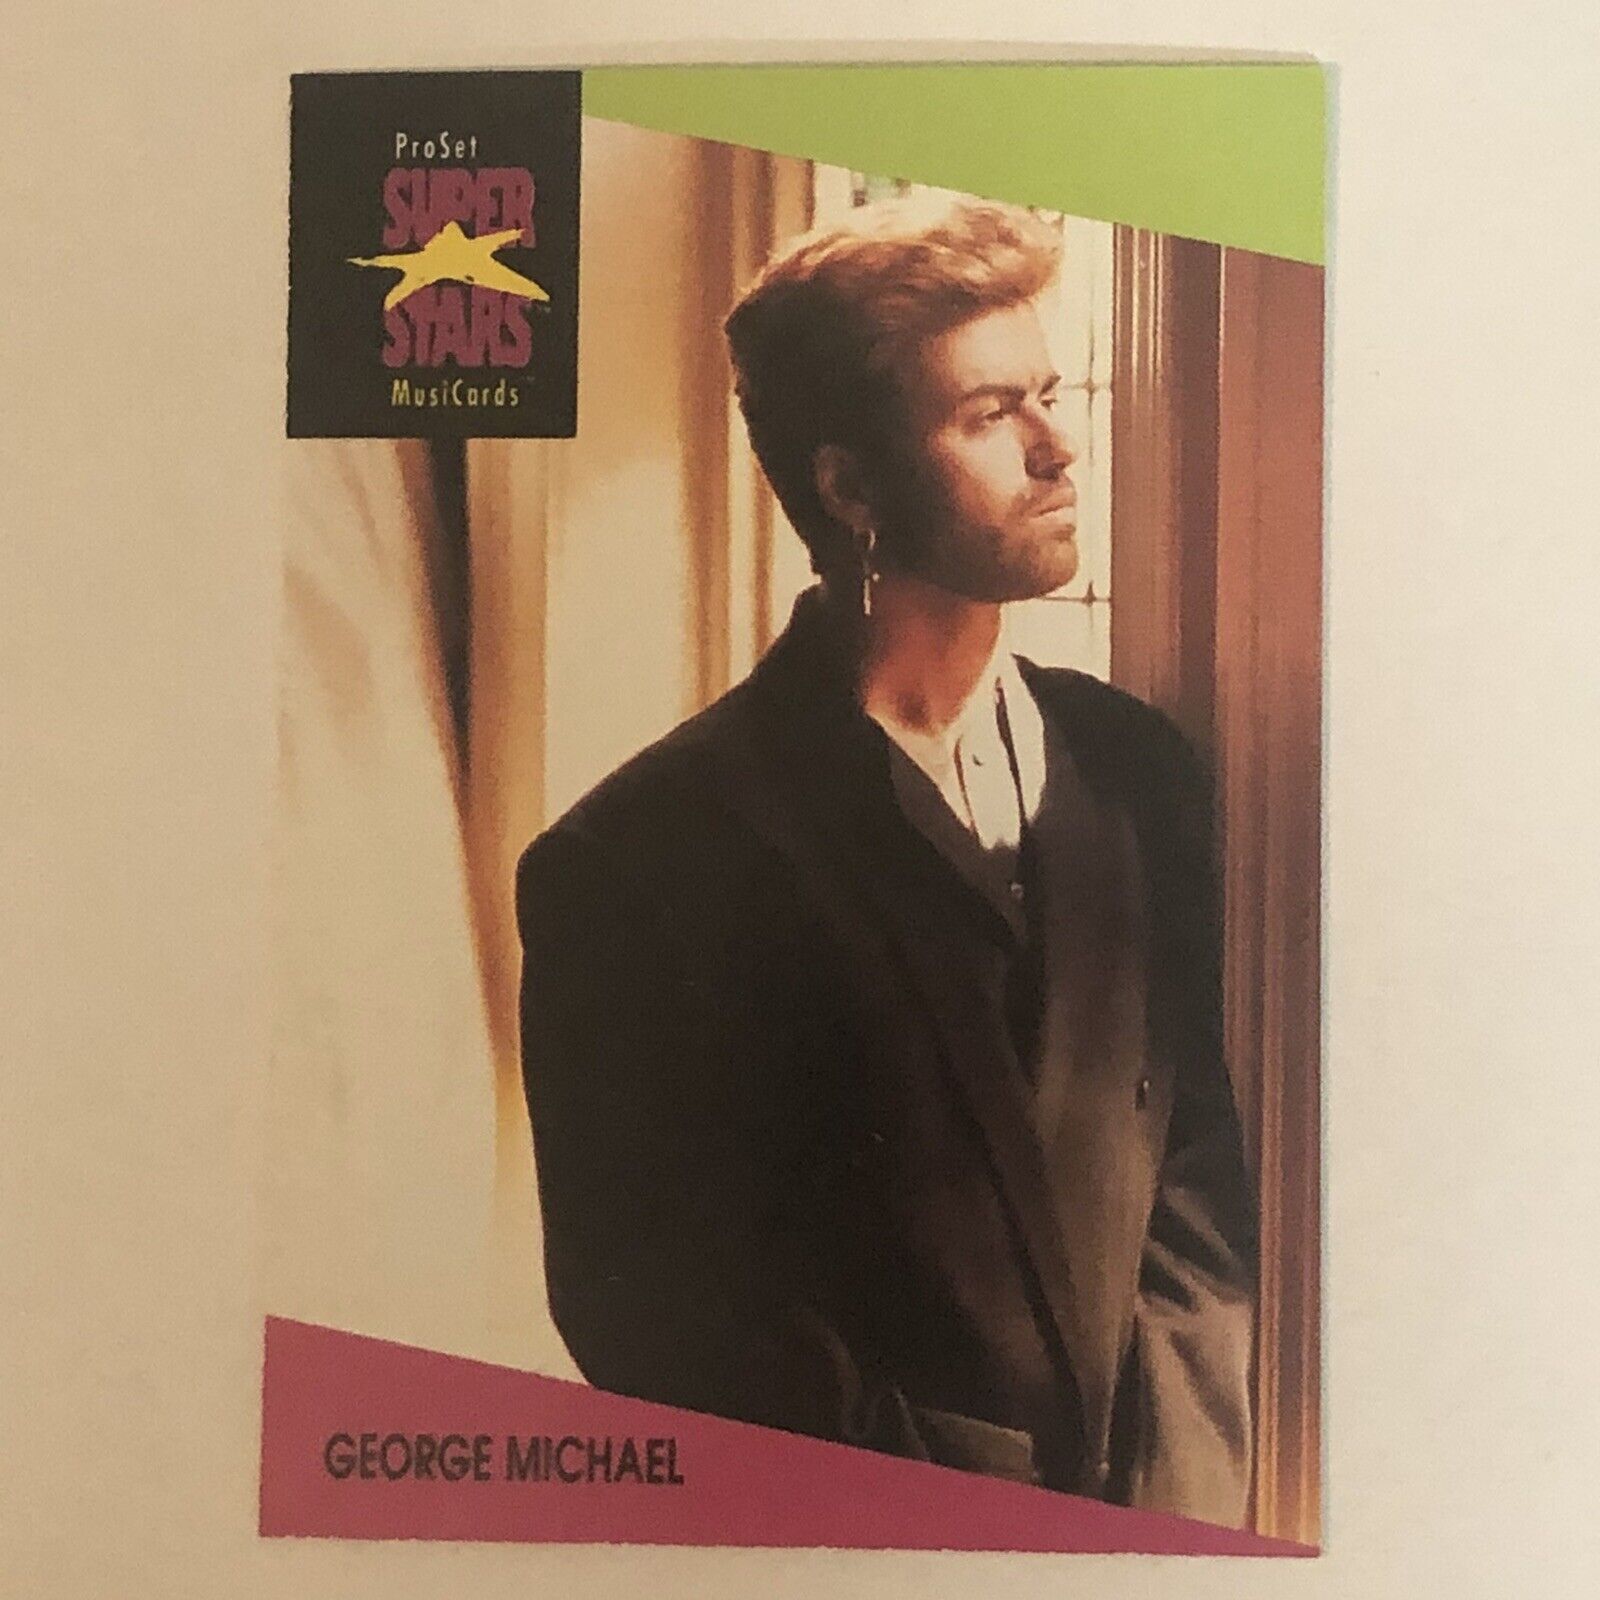 George Michael Trading Card Musicards Super Stars #74